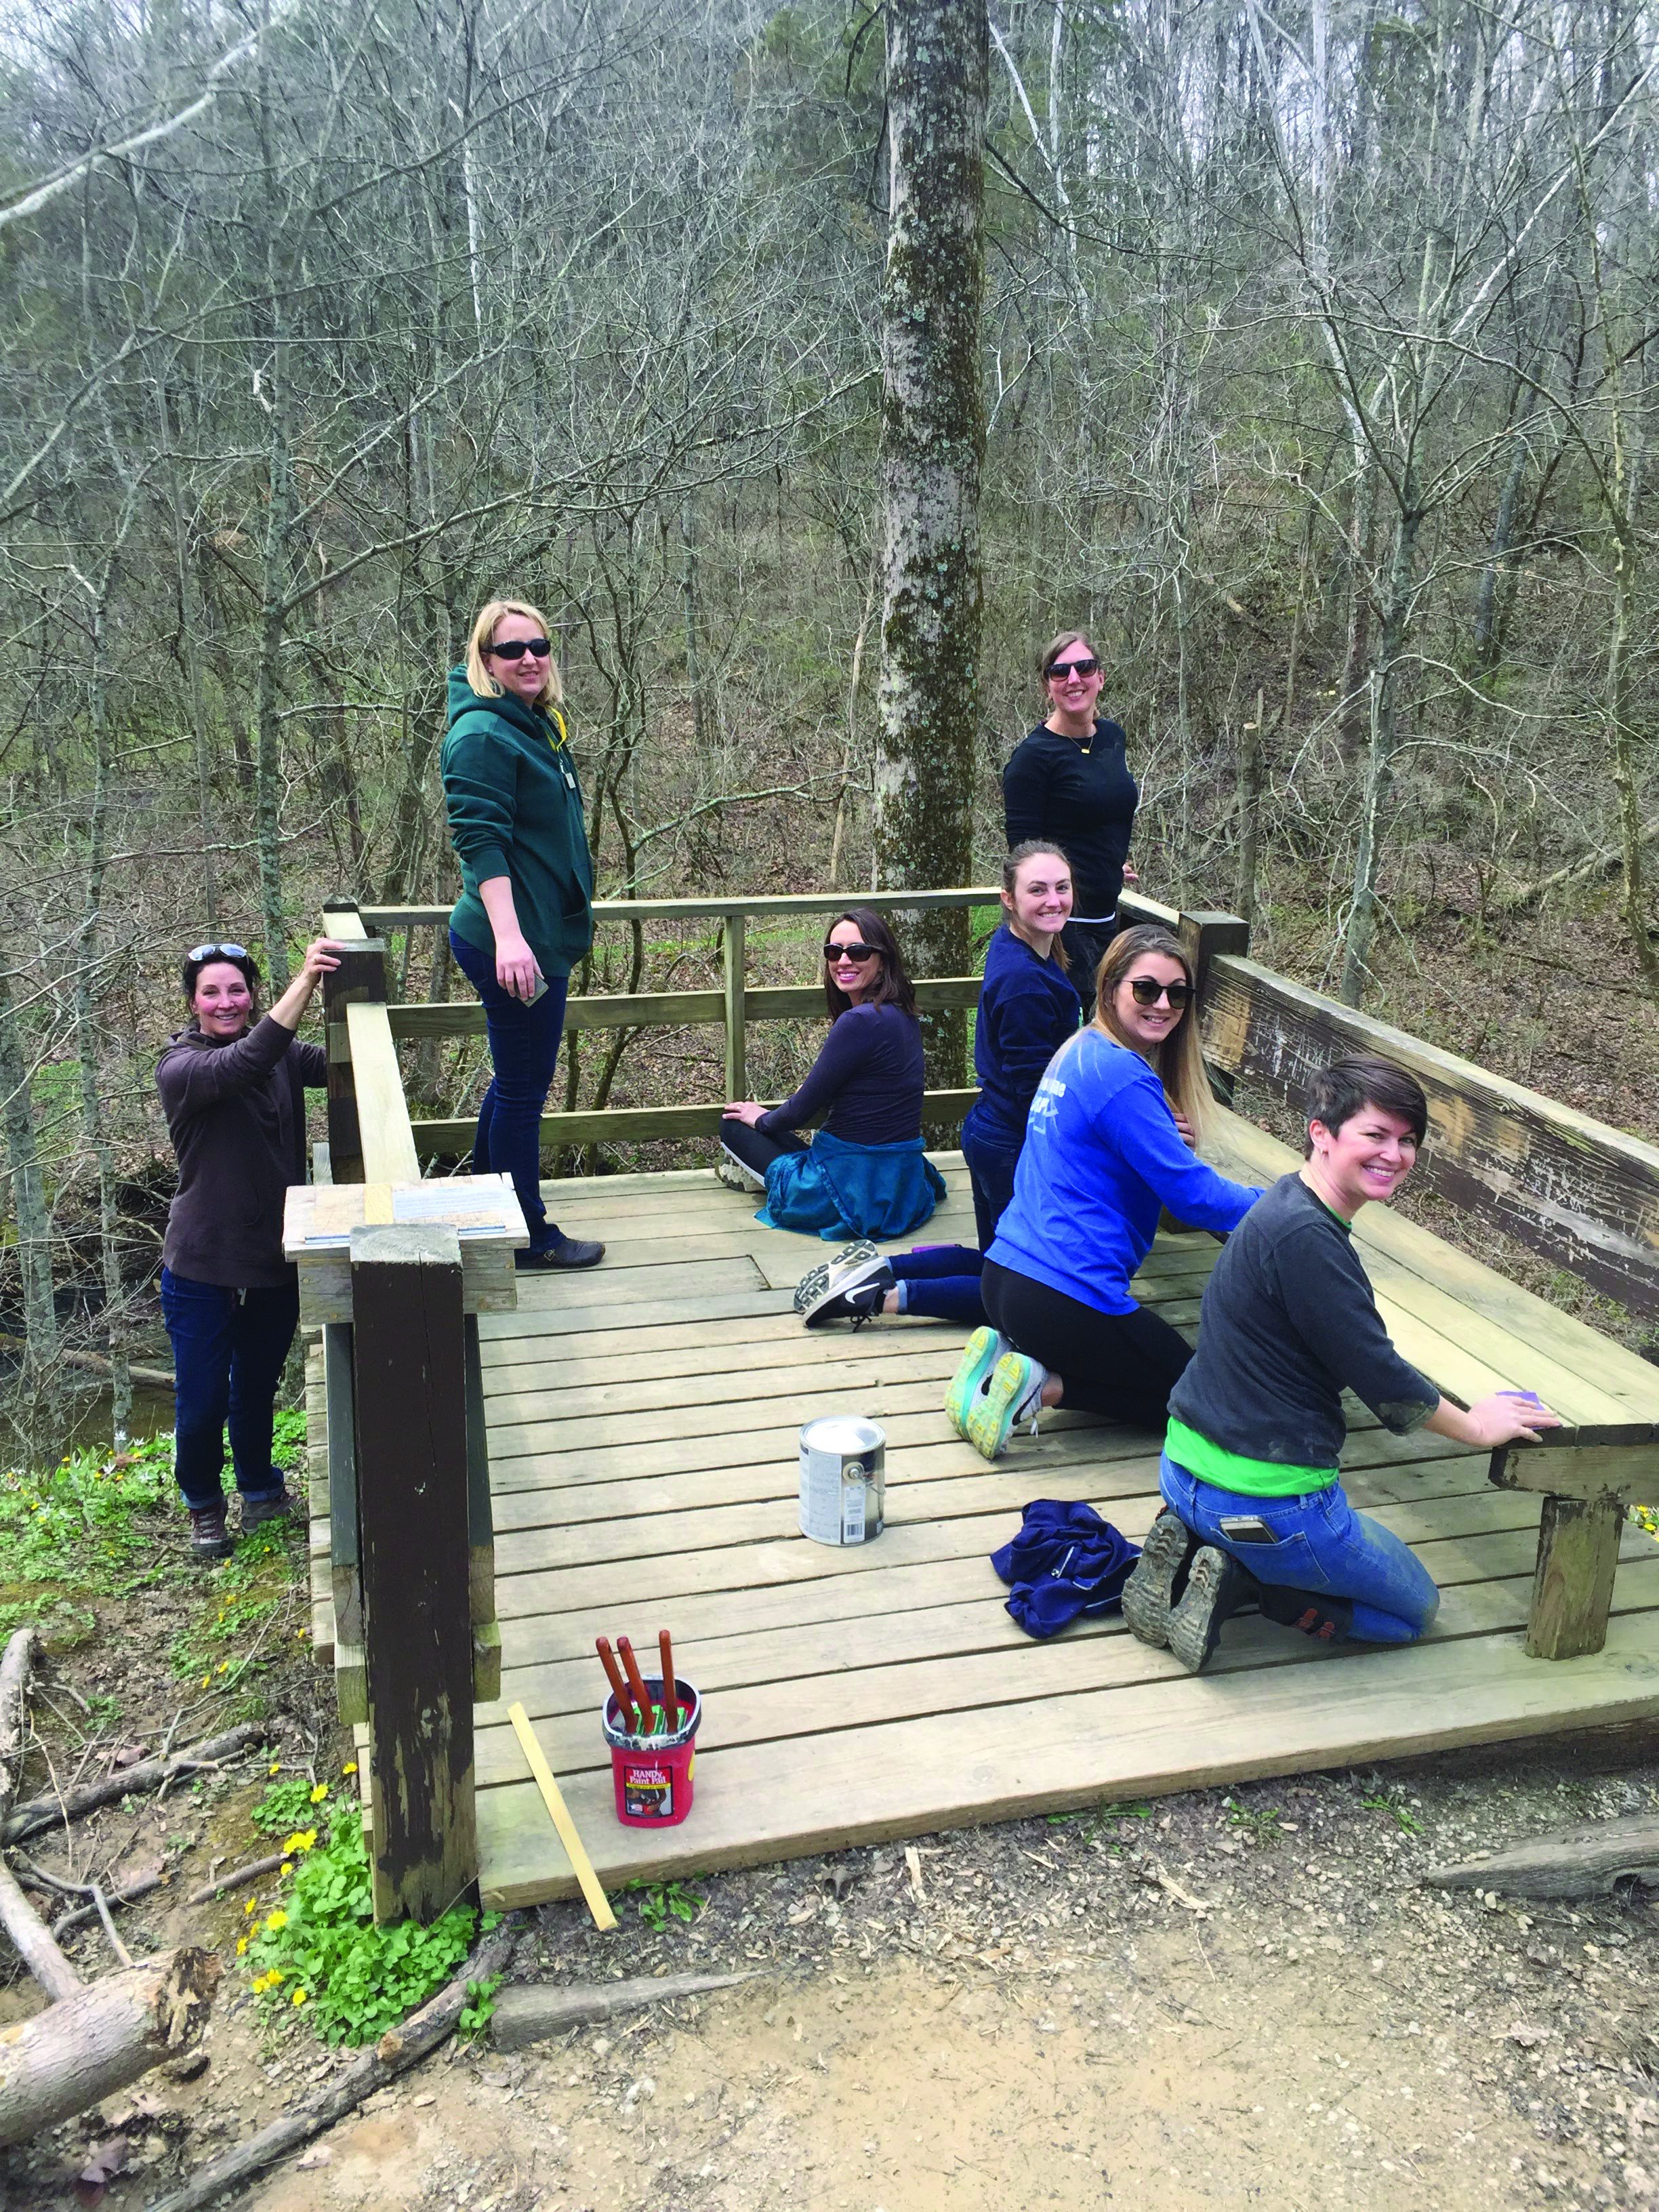 A group of young white women working on a wooden deck overlook